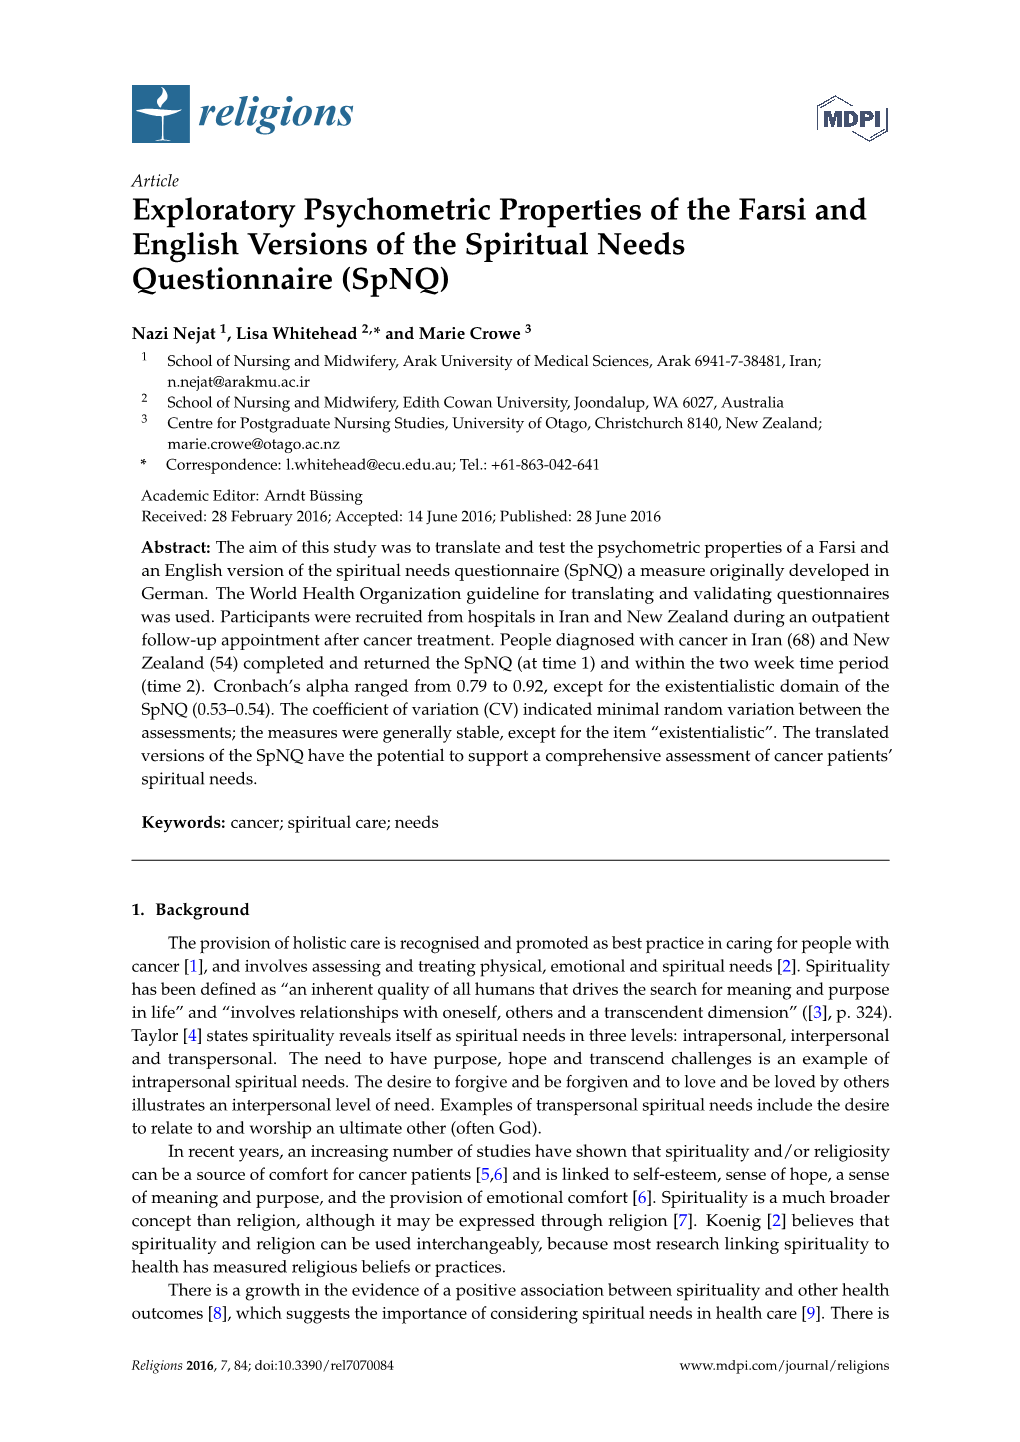 Exploratory Psychometric Properties of the Farsi and English Versions of the Spiritual Needs Questionnaire (Spnq)